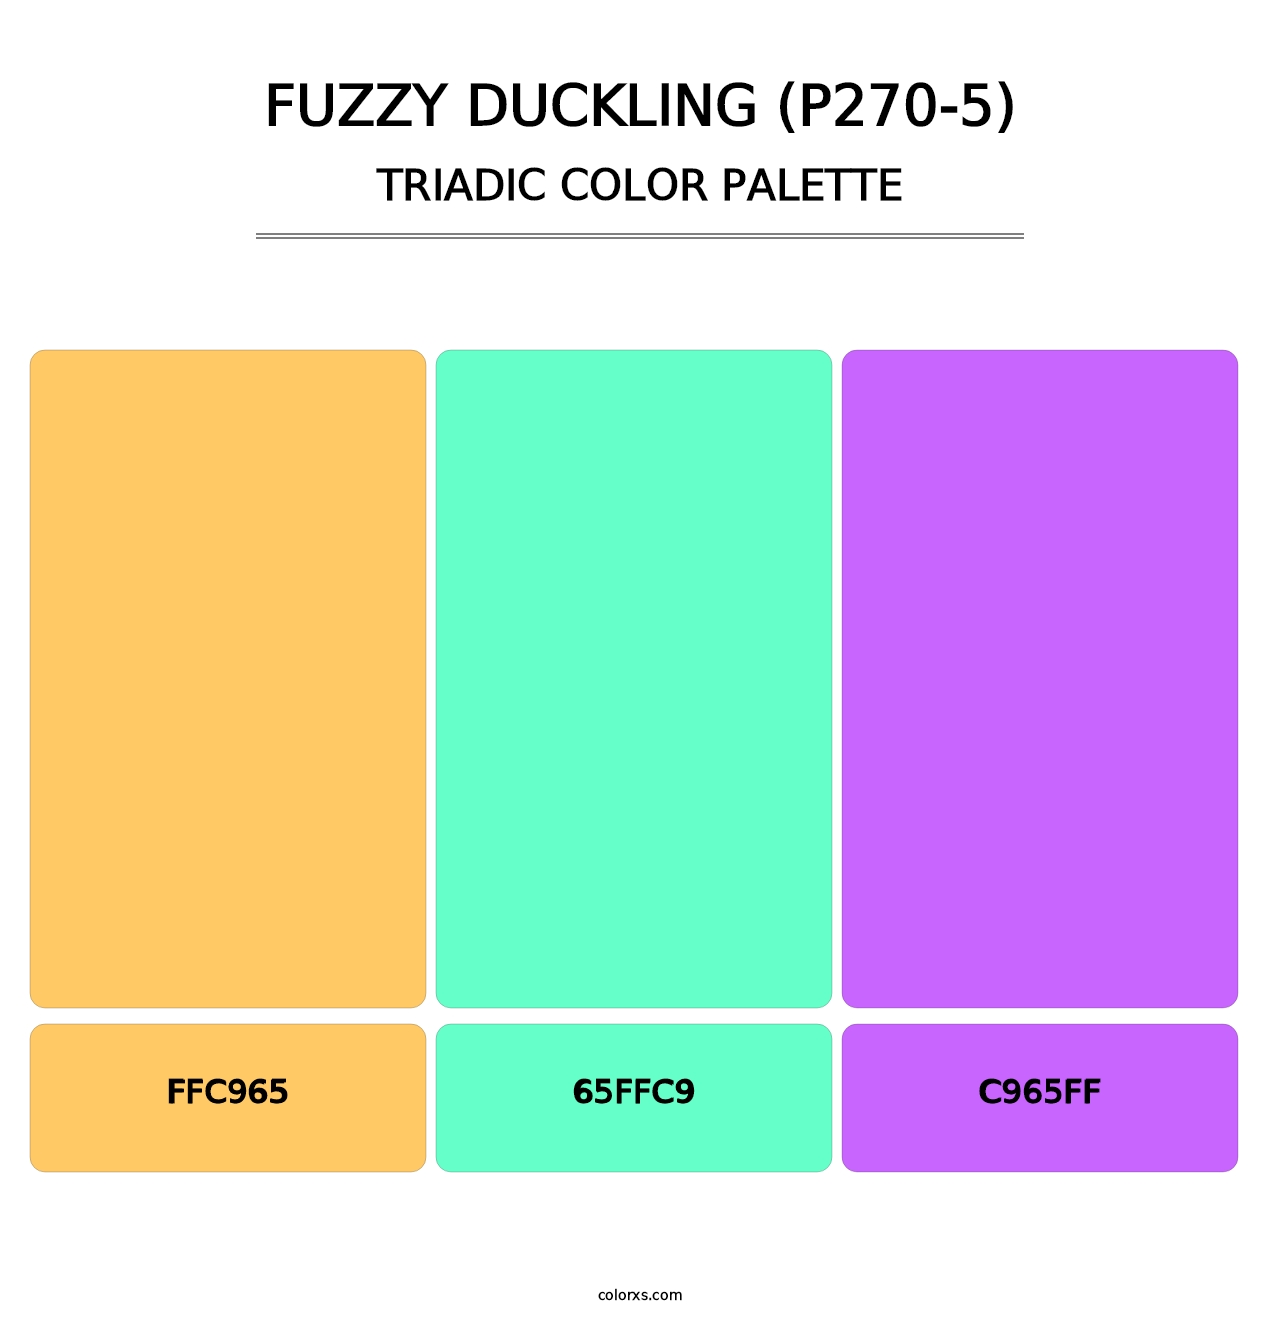 Fuzzy Duckling (P270-5) - Triadic Color Palette